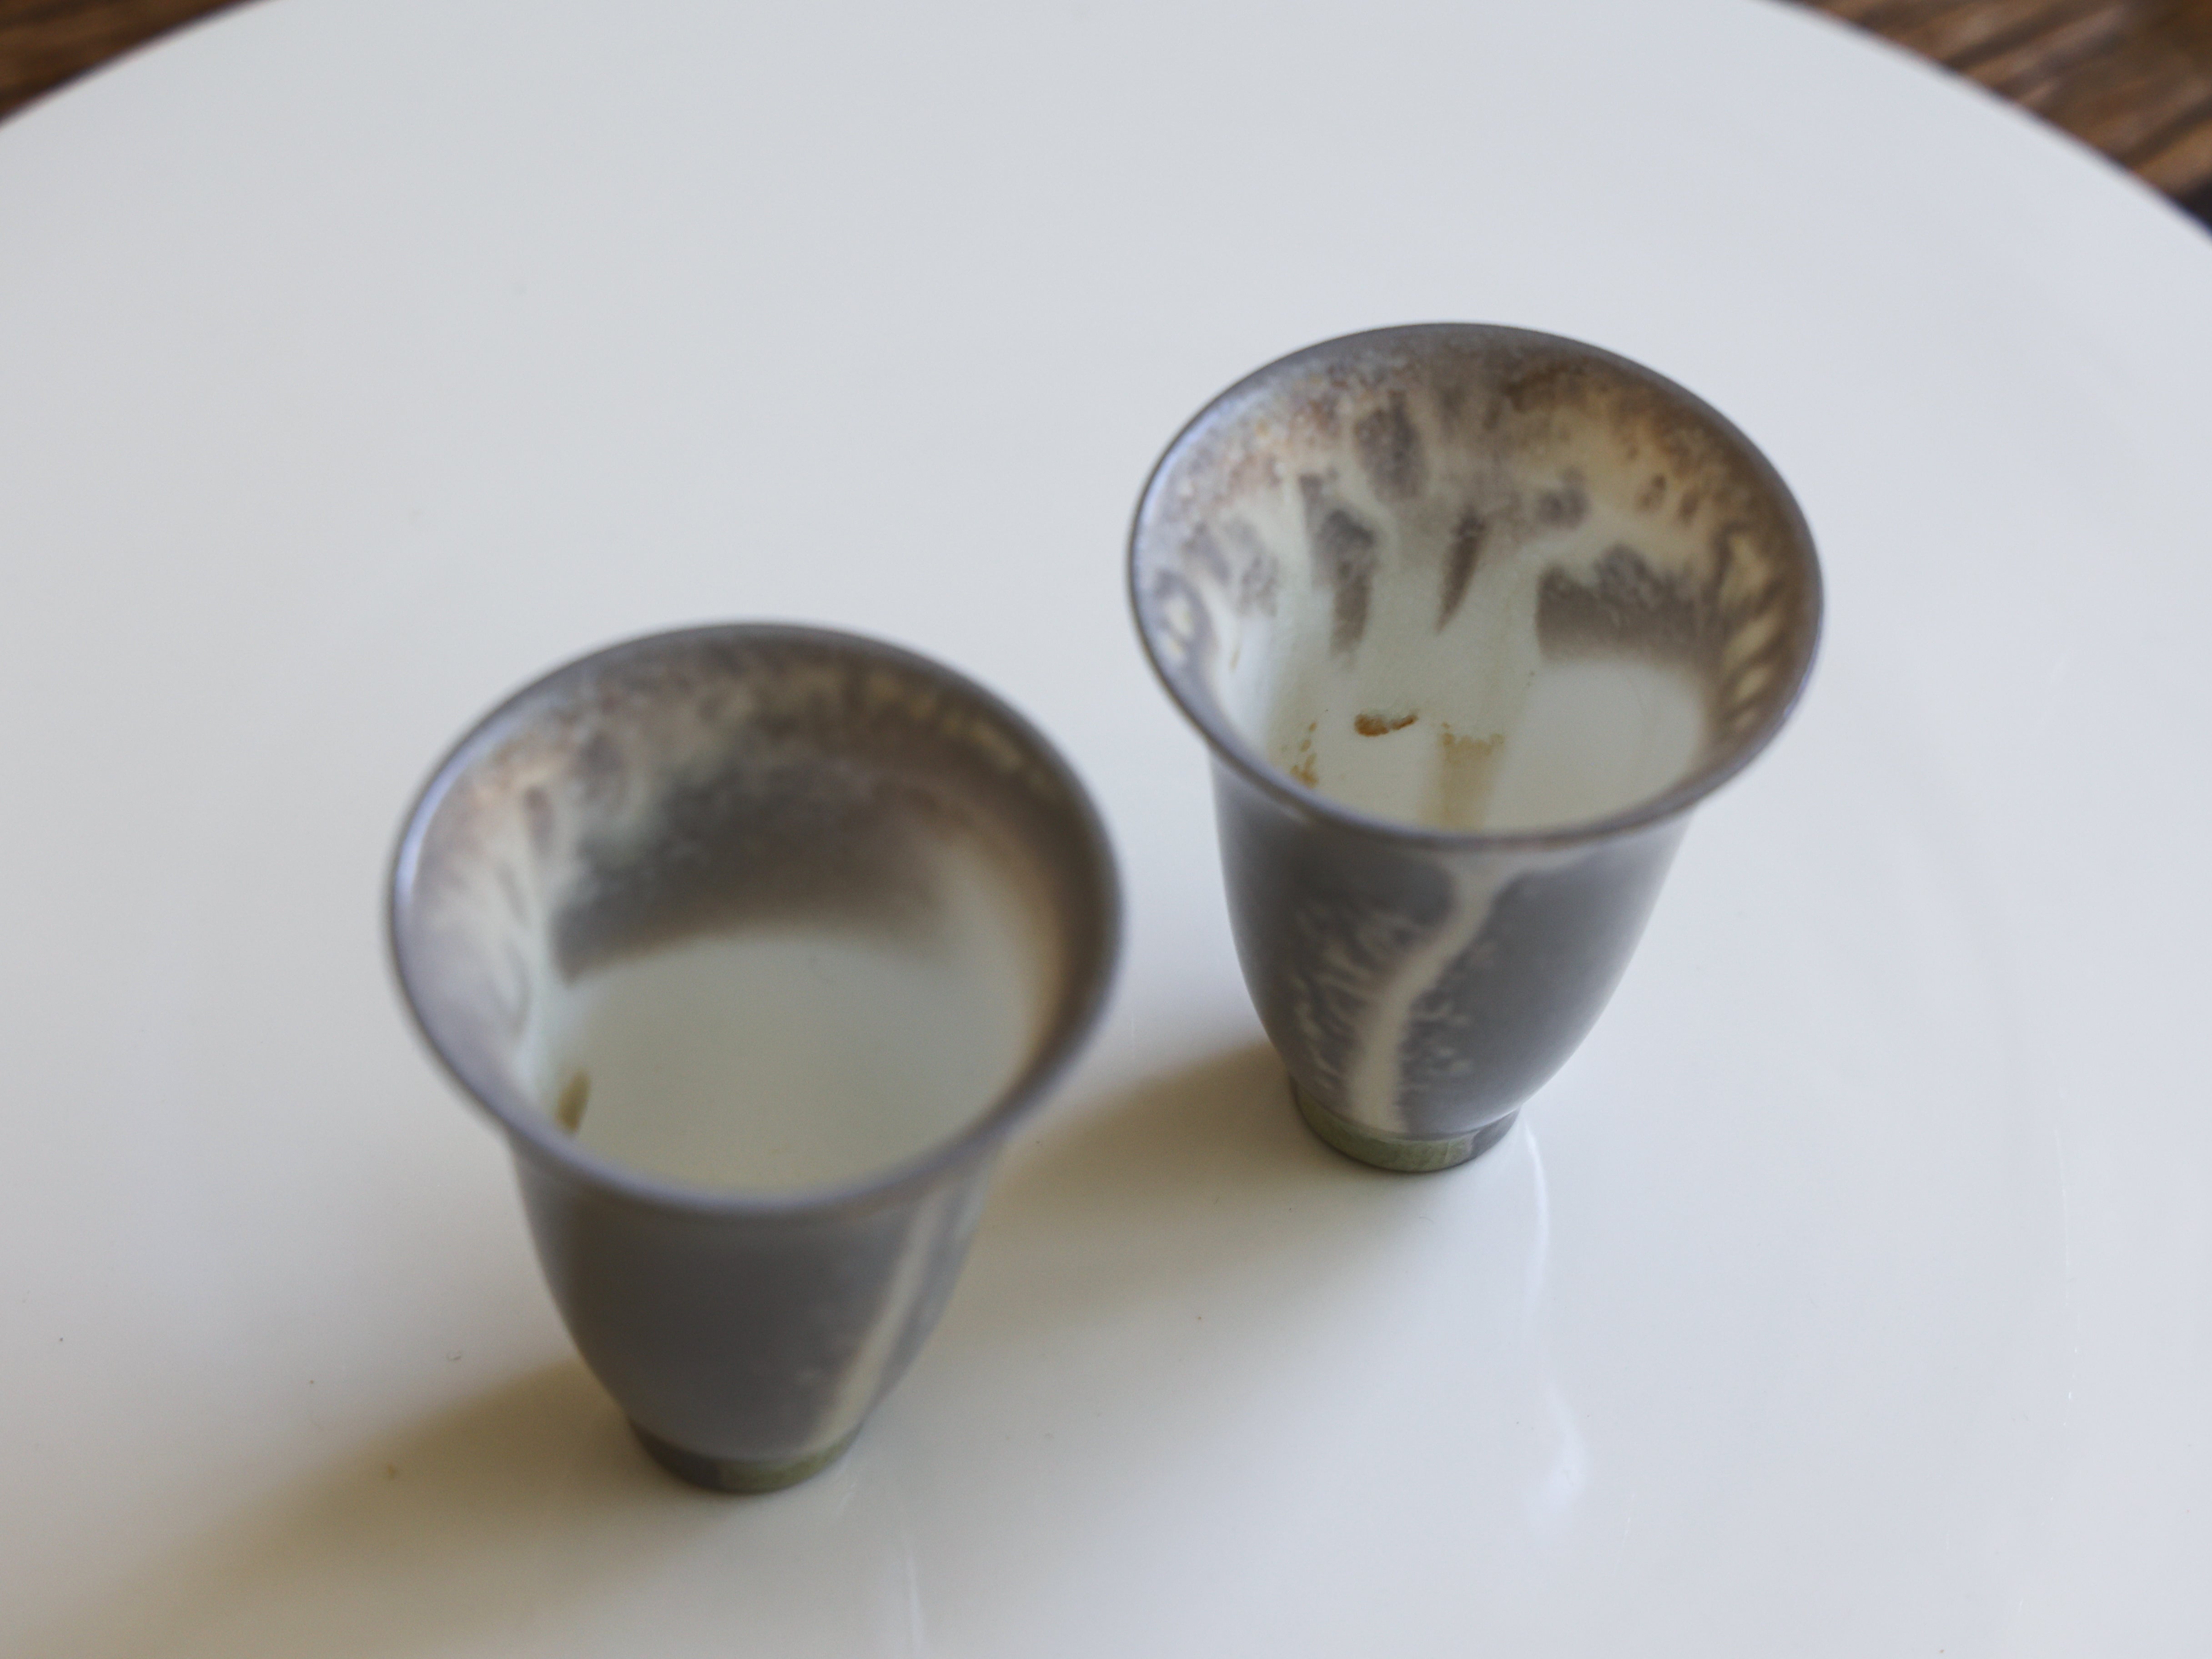 Thunder Woodfired Teacups (set of two)